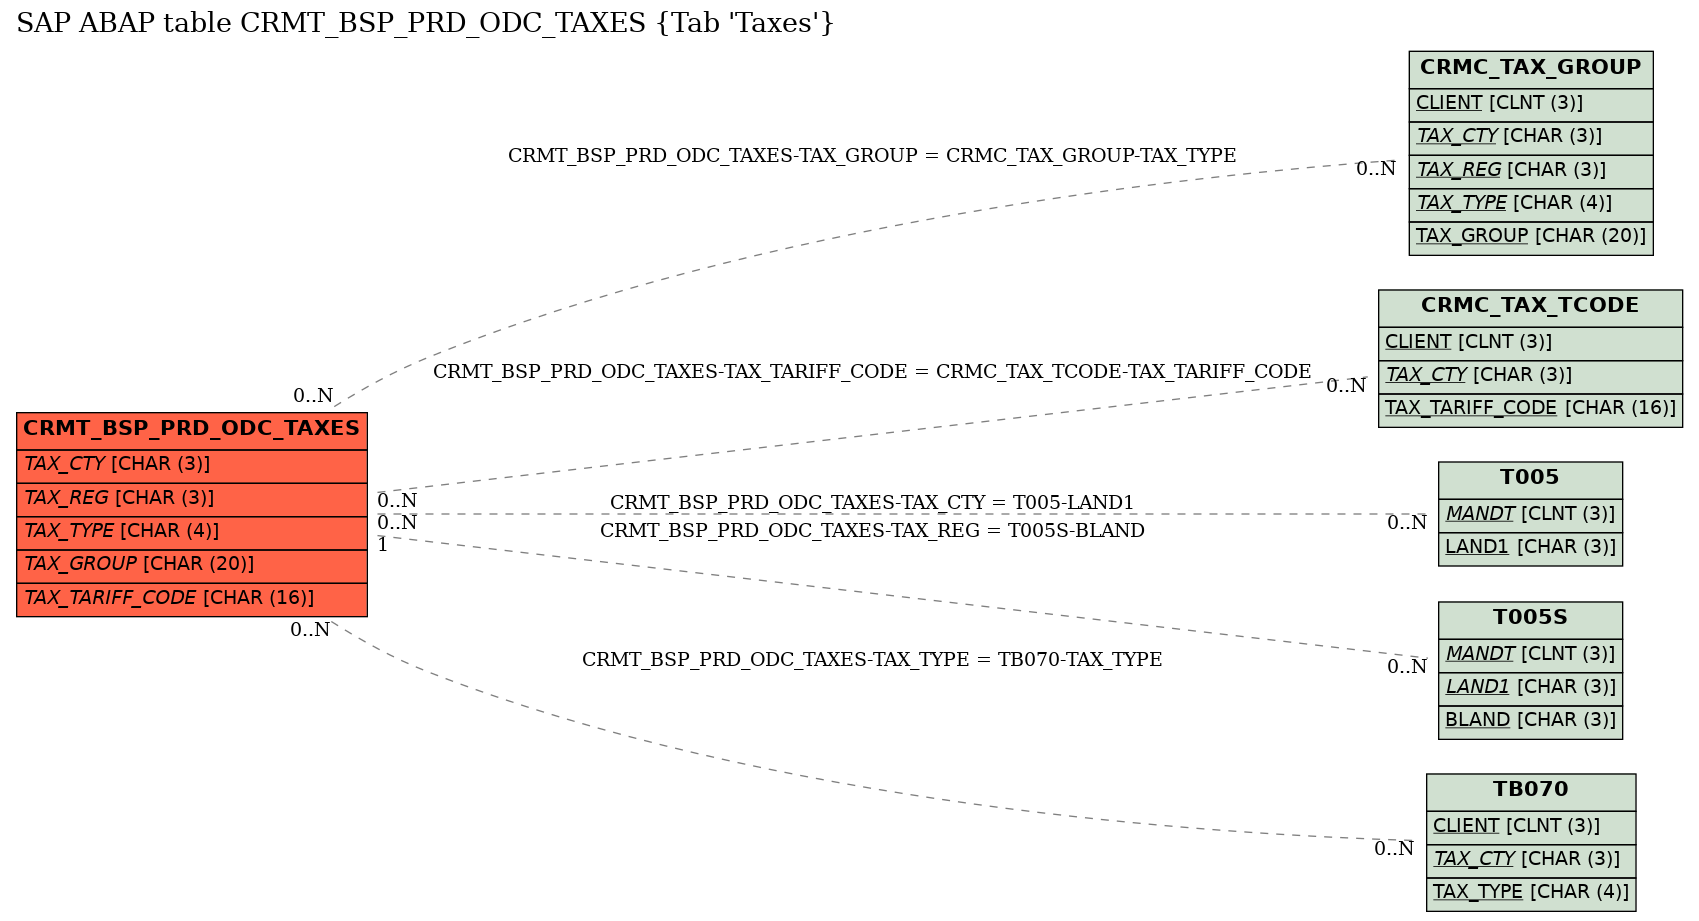 E-R Diagram for table CRMT_BSP_PRD_ODC_TAXES (Tab 